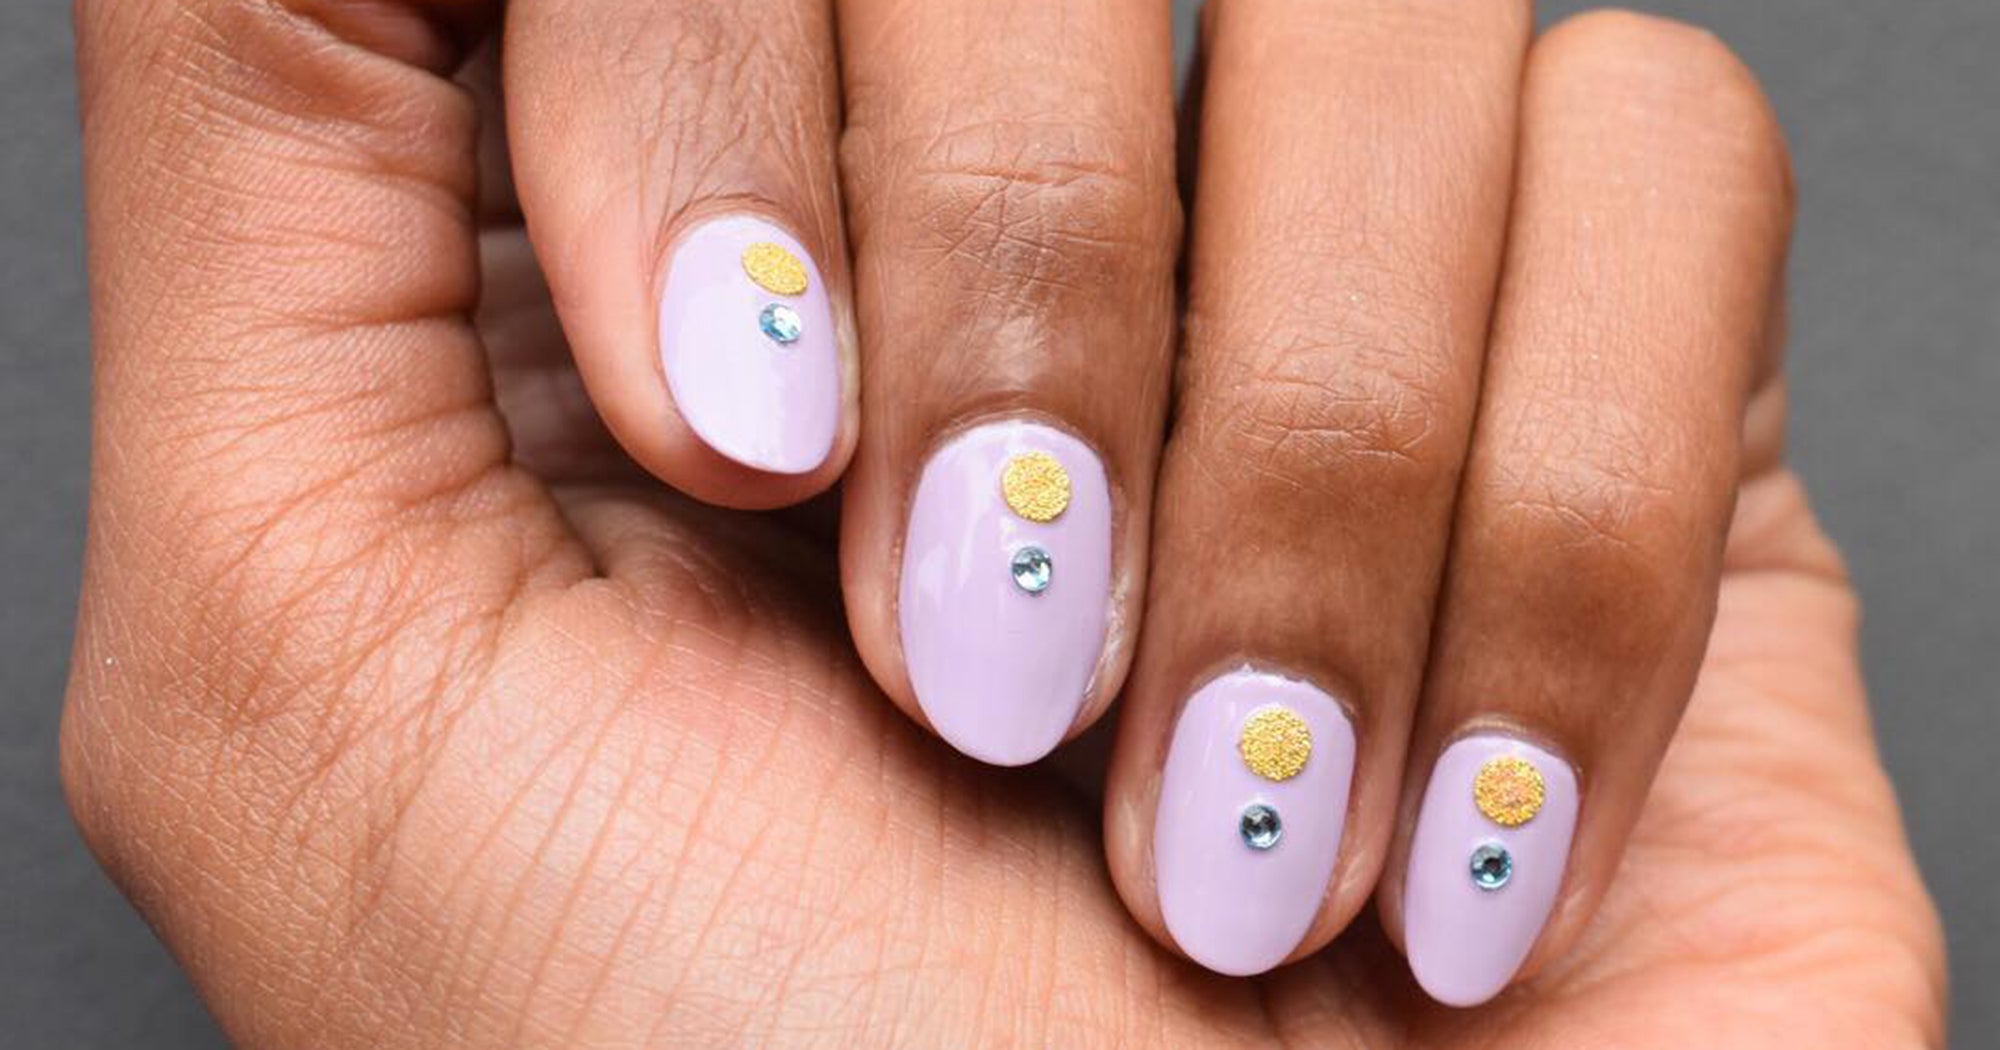 3. Lavender Ombre Nails with Rhinestones - wide 8